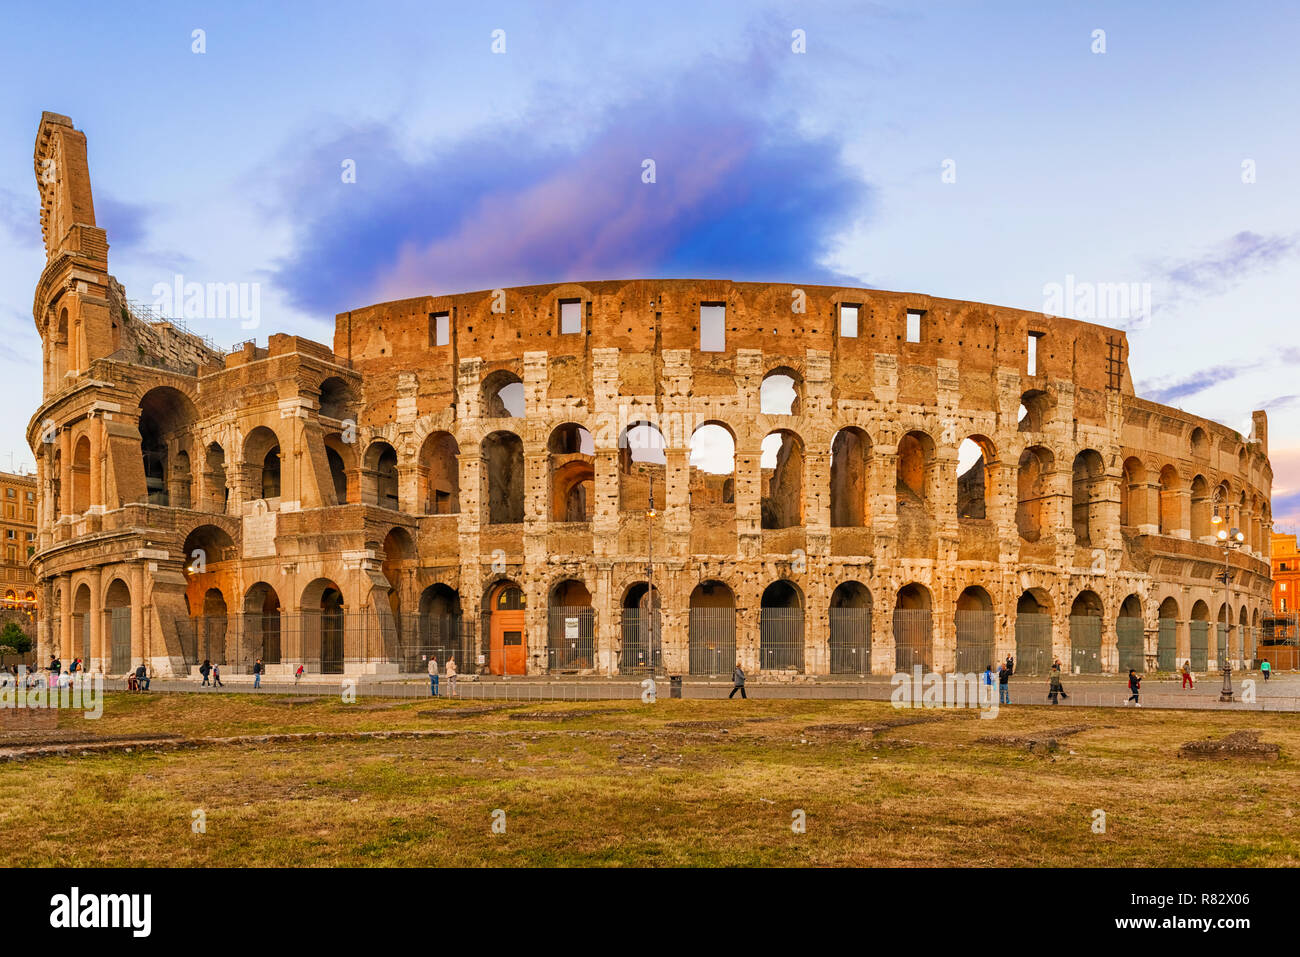 Rome, Italy - September 1, 2014: Part of the Flavian Amphitheatre known as the Coliseum. it is one of the main tourist attractions of the city of Rome Stock Photo